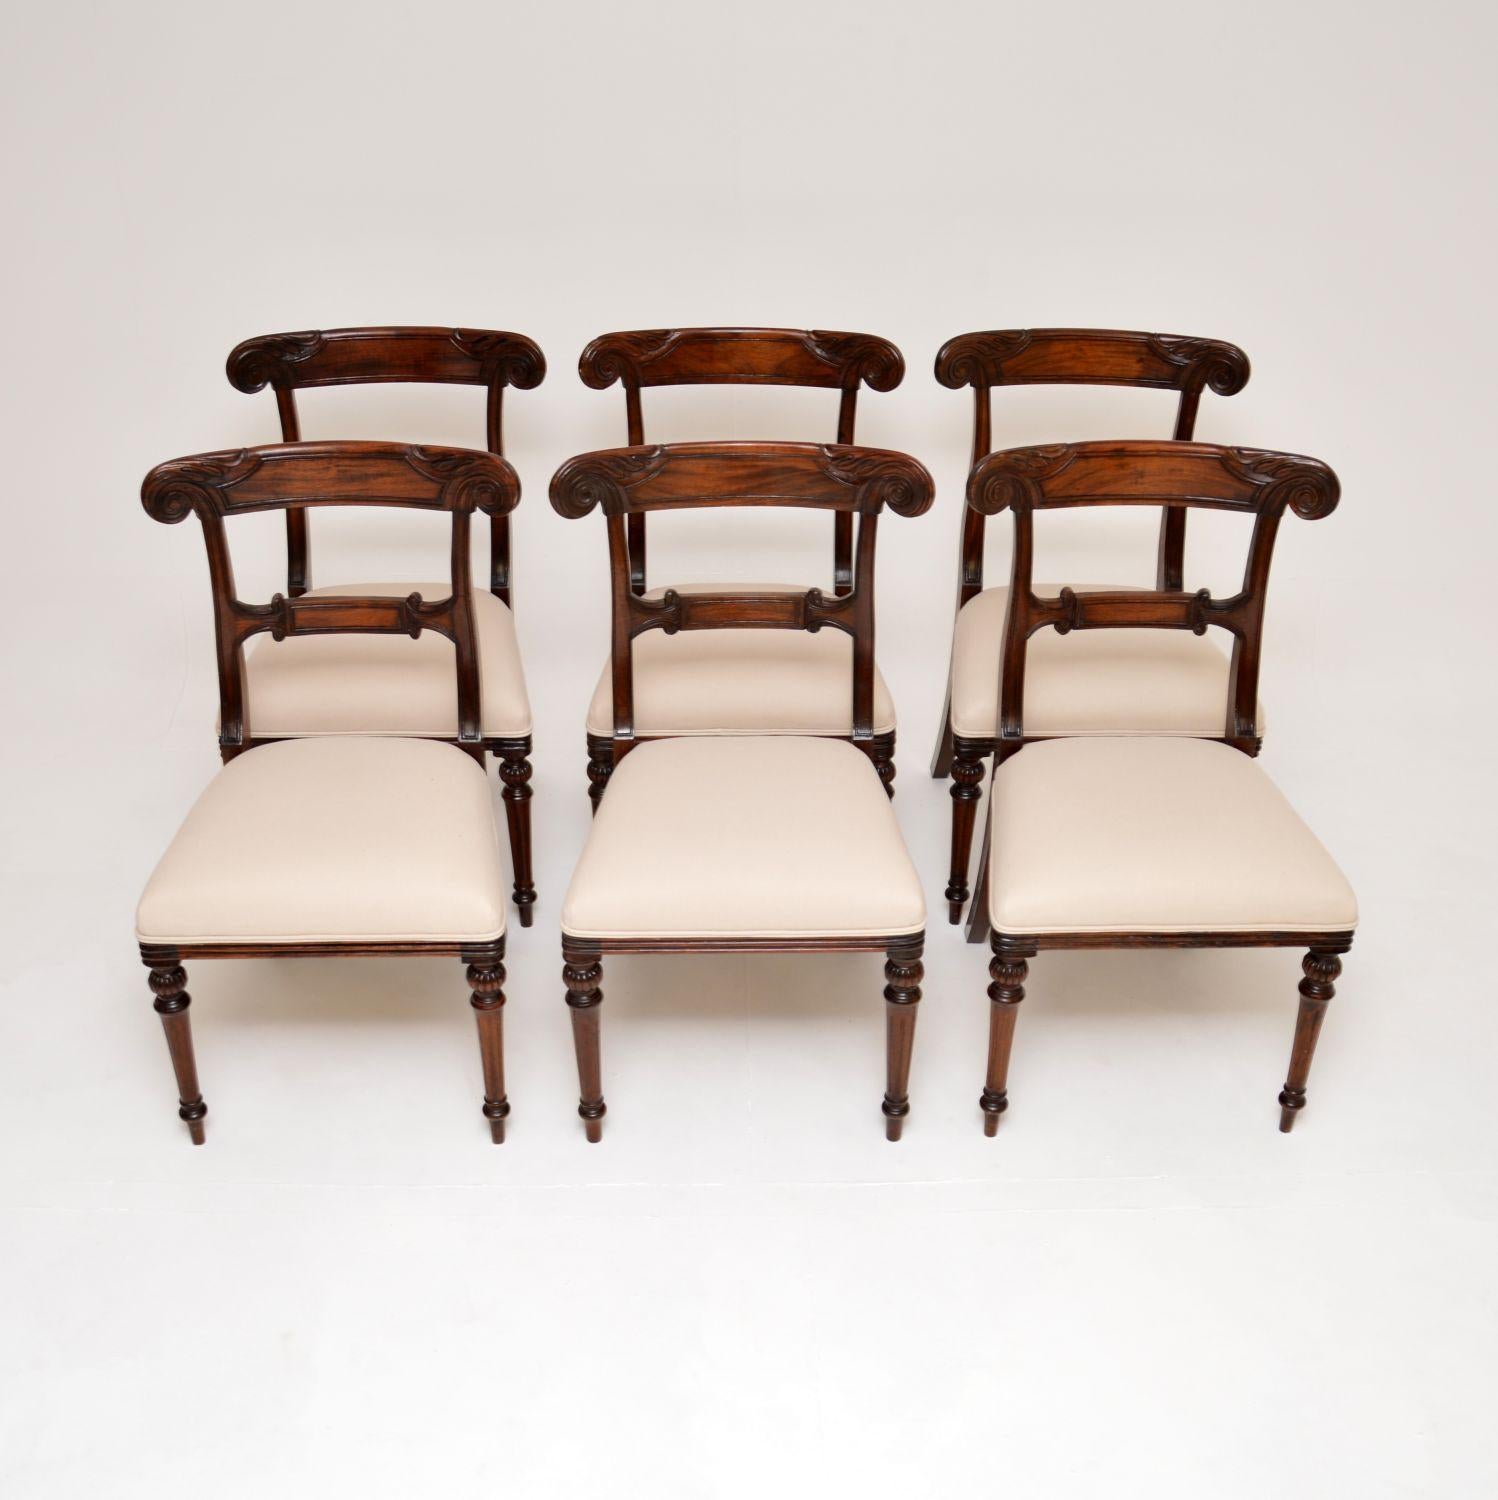 An outstanding set of original antique Regency period dining chairs. They were made in England, they date from the 1820-1830 period.

The quality is superb, they are beautifully constructed with fine carving and an elegant design. The wood has a